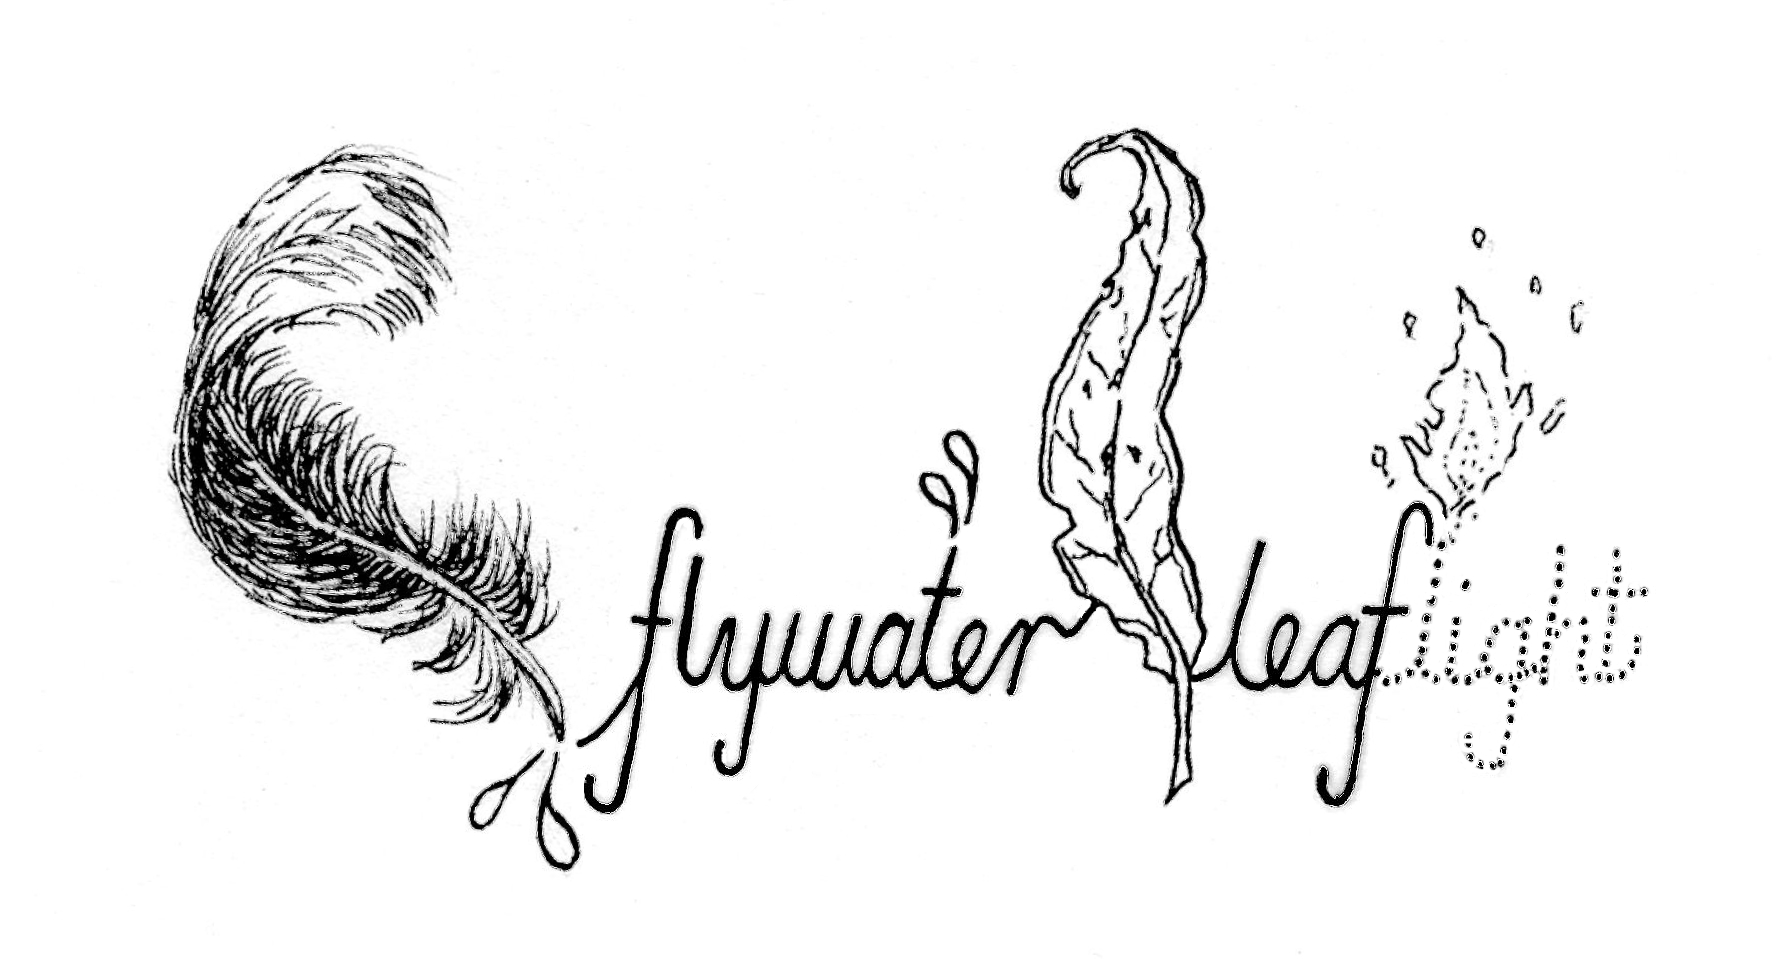 FlyWater LeafLight